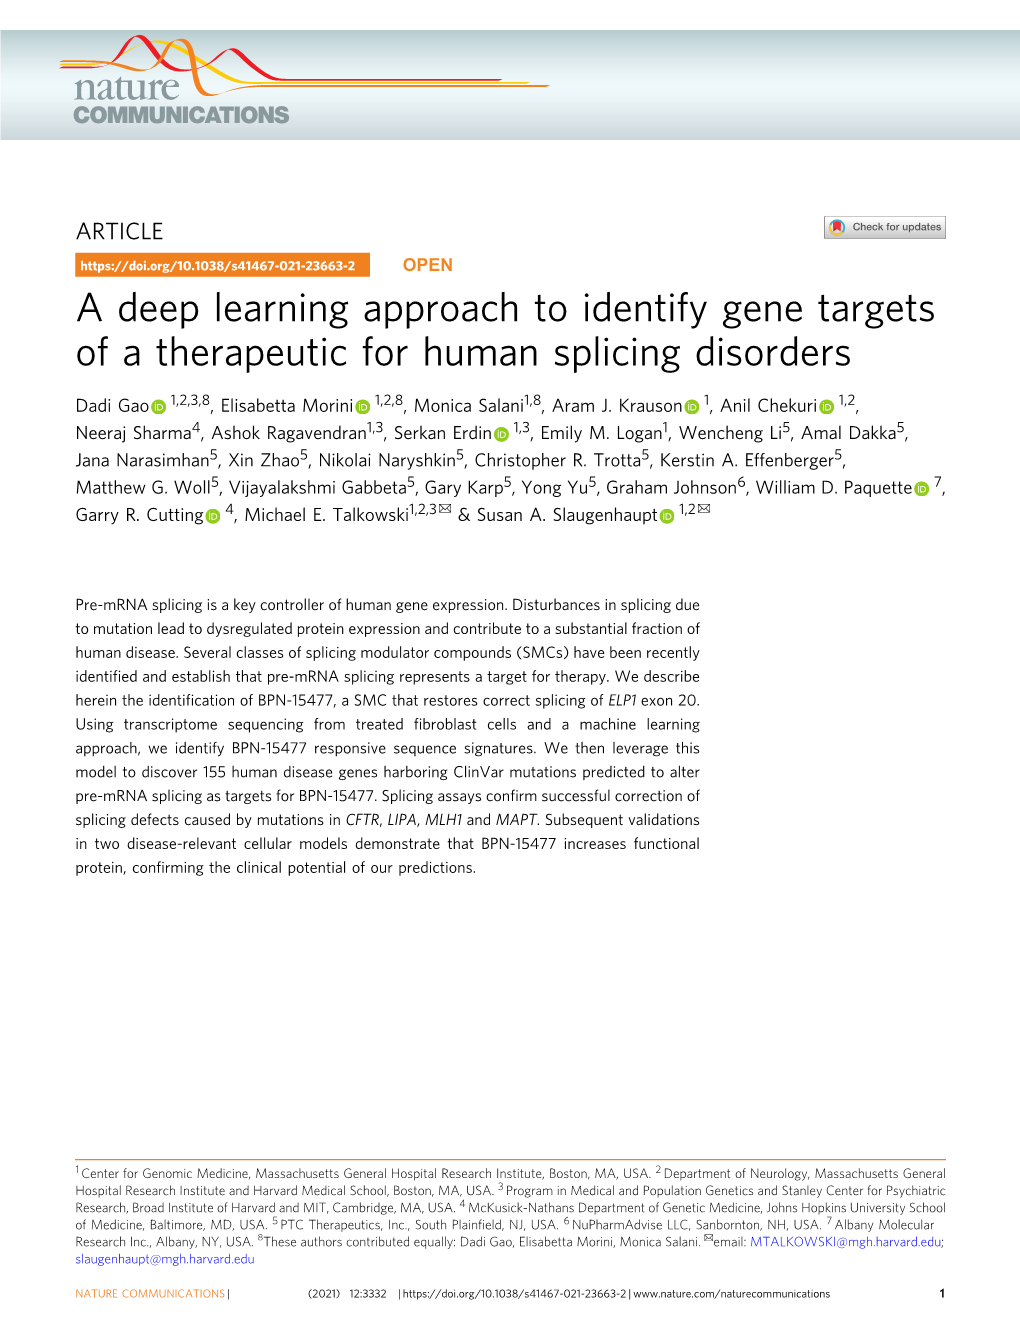 A Deep Learning Approach to Identify Gene Targets of a Therapeutic for Human Splicing Disorders